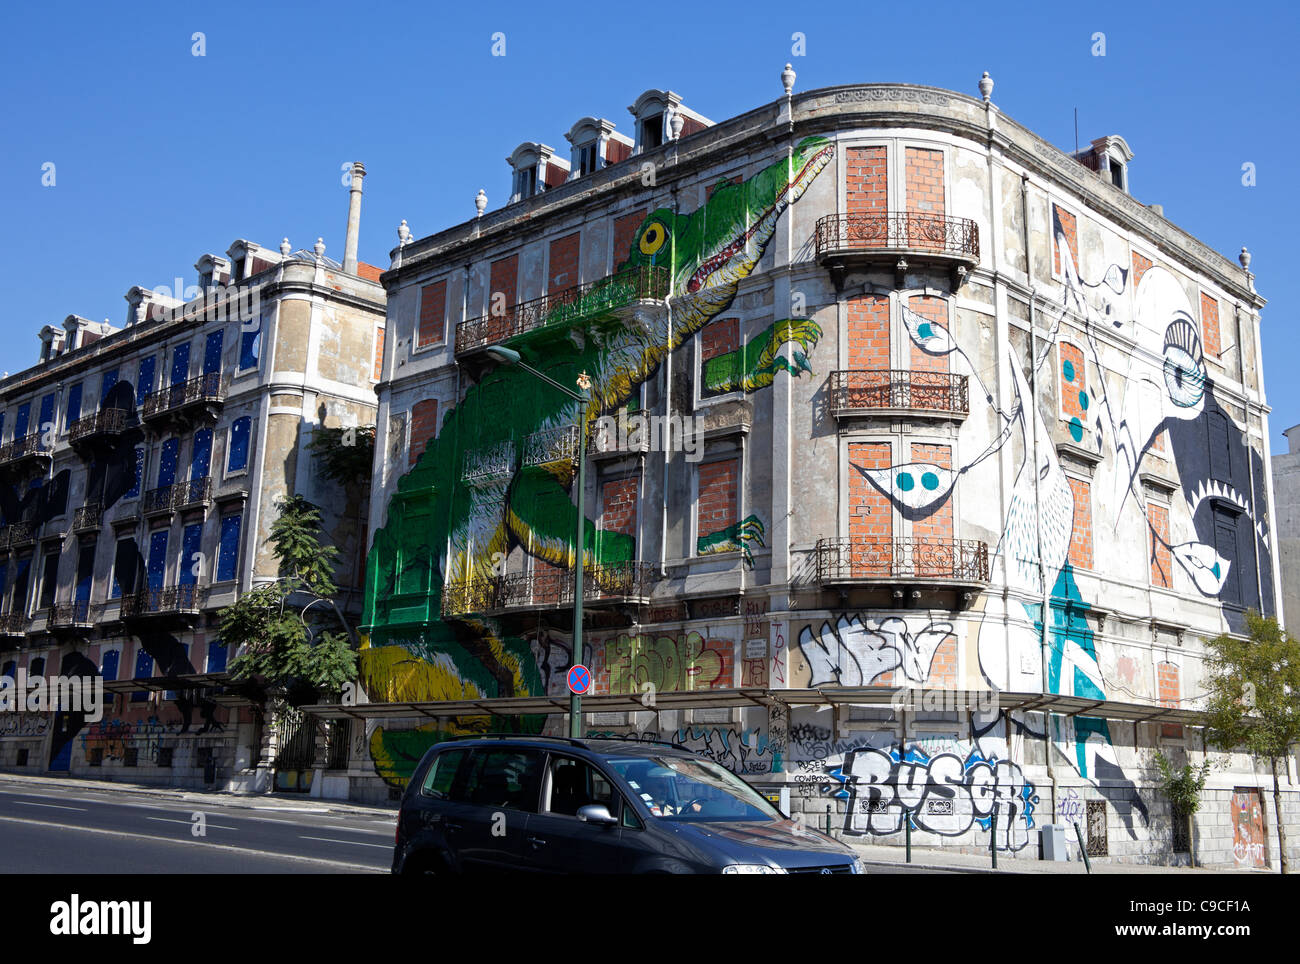 Graffiti on outer walls of derelict building, Lisbon Portugal Europe Stock Photo